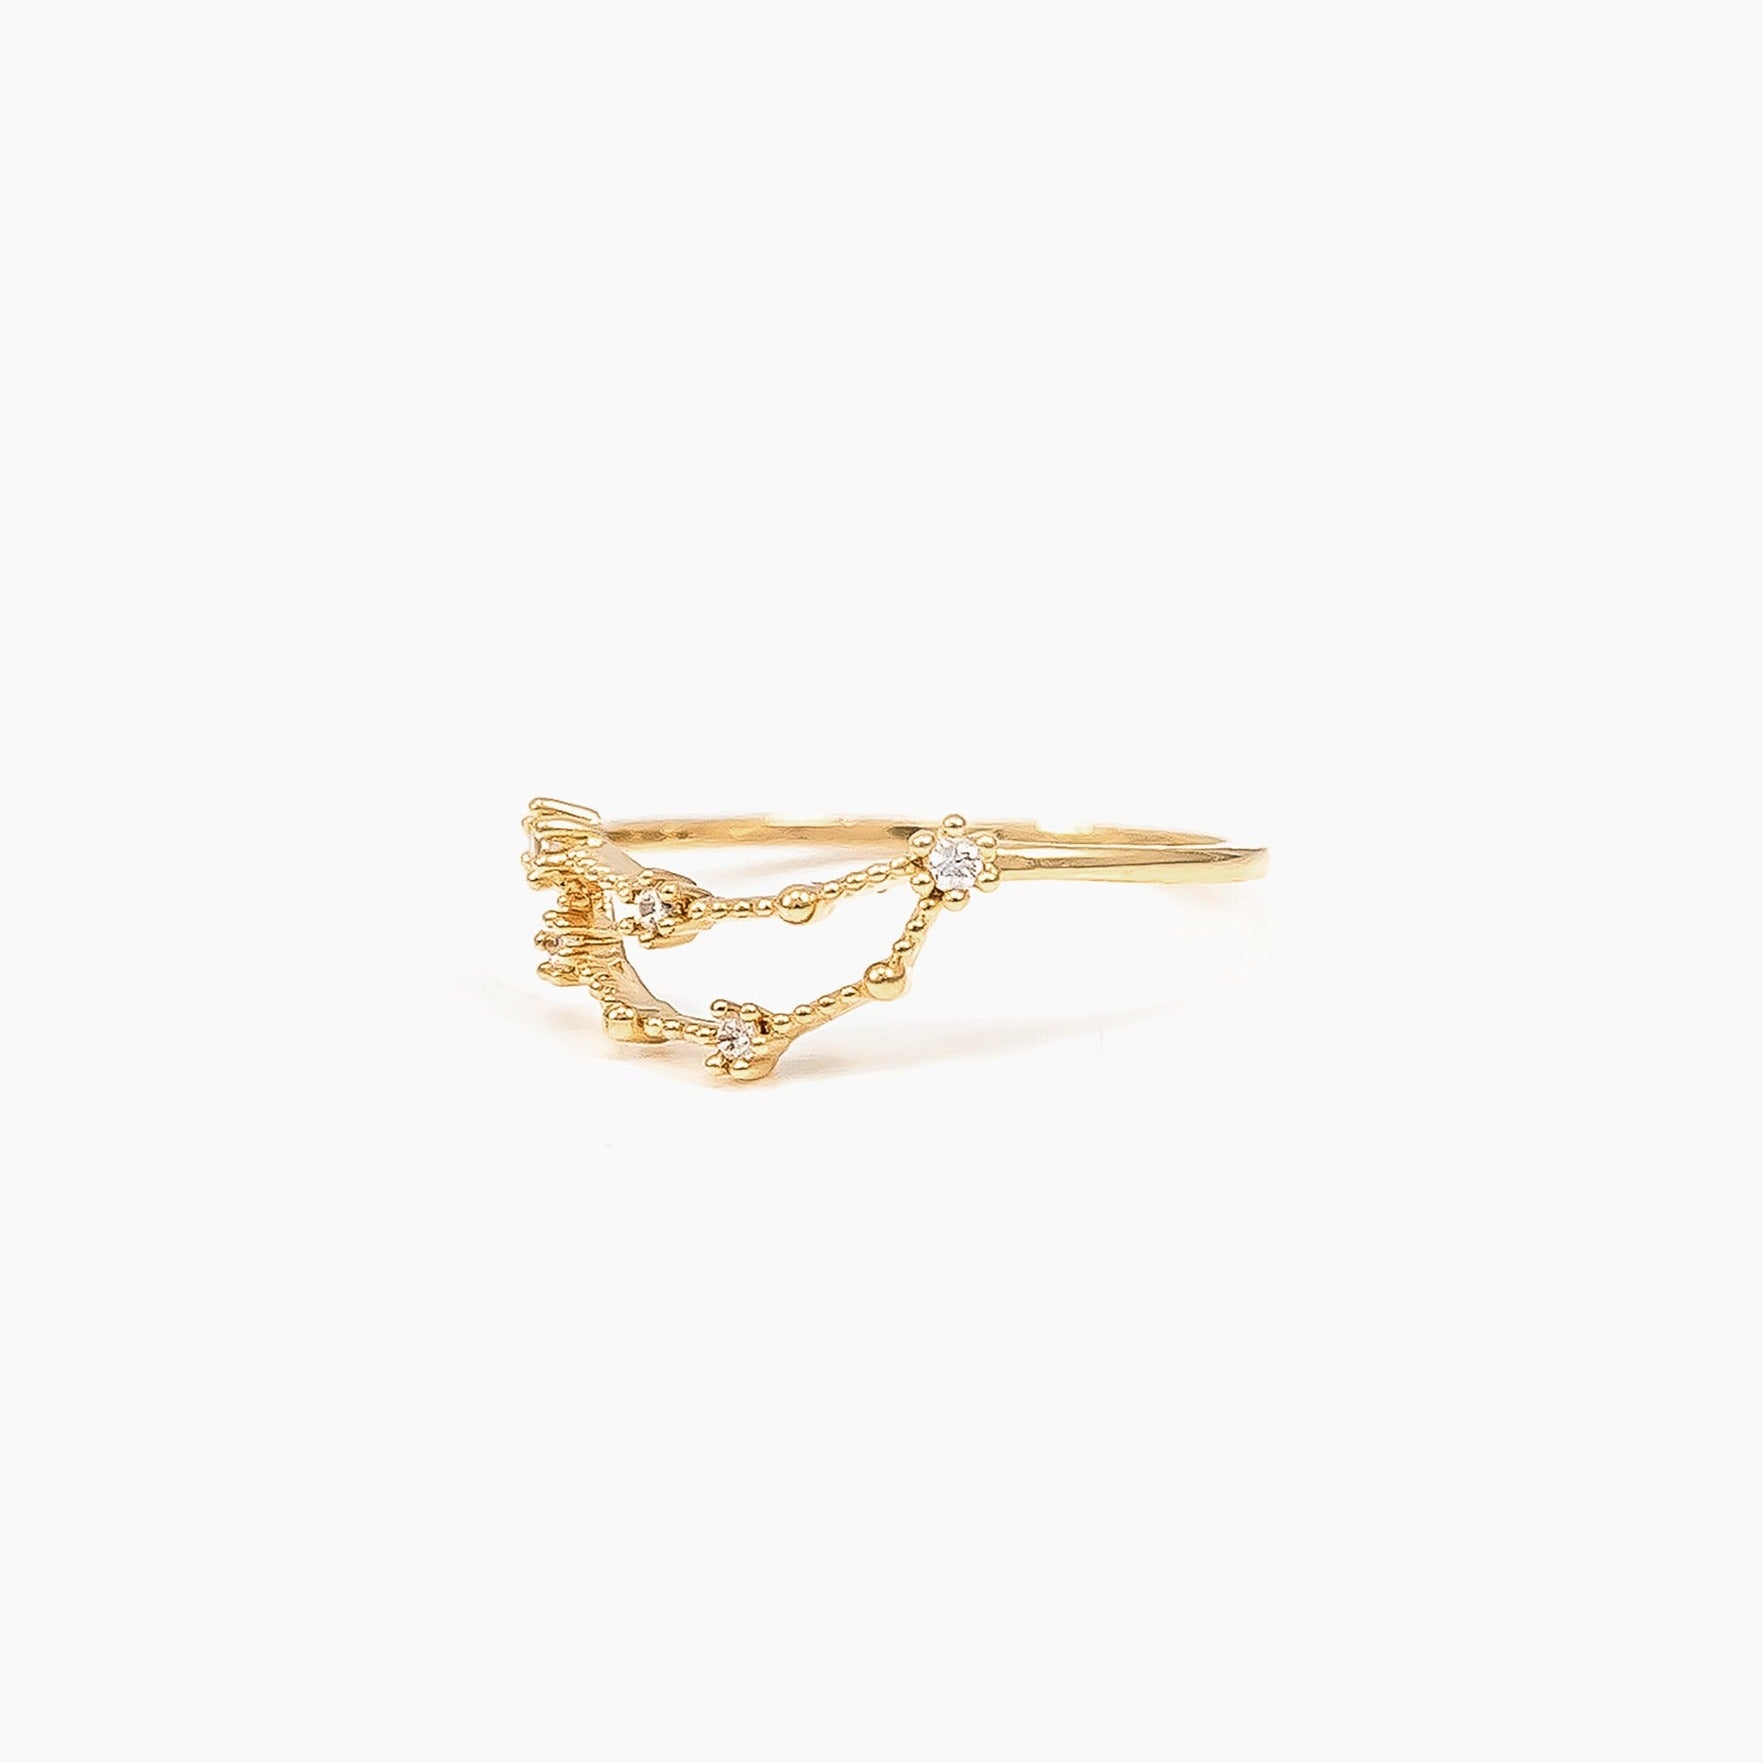 Cancer – Zodiac Constellation Celestial Jewelry Rings